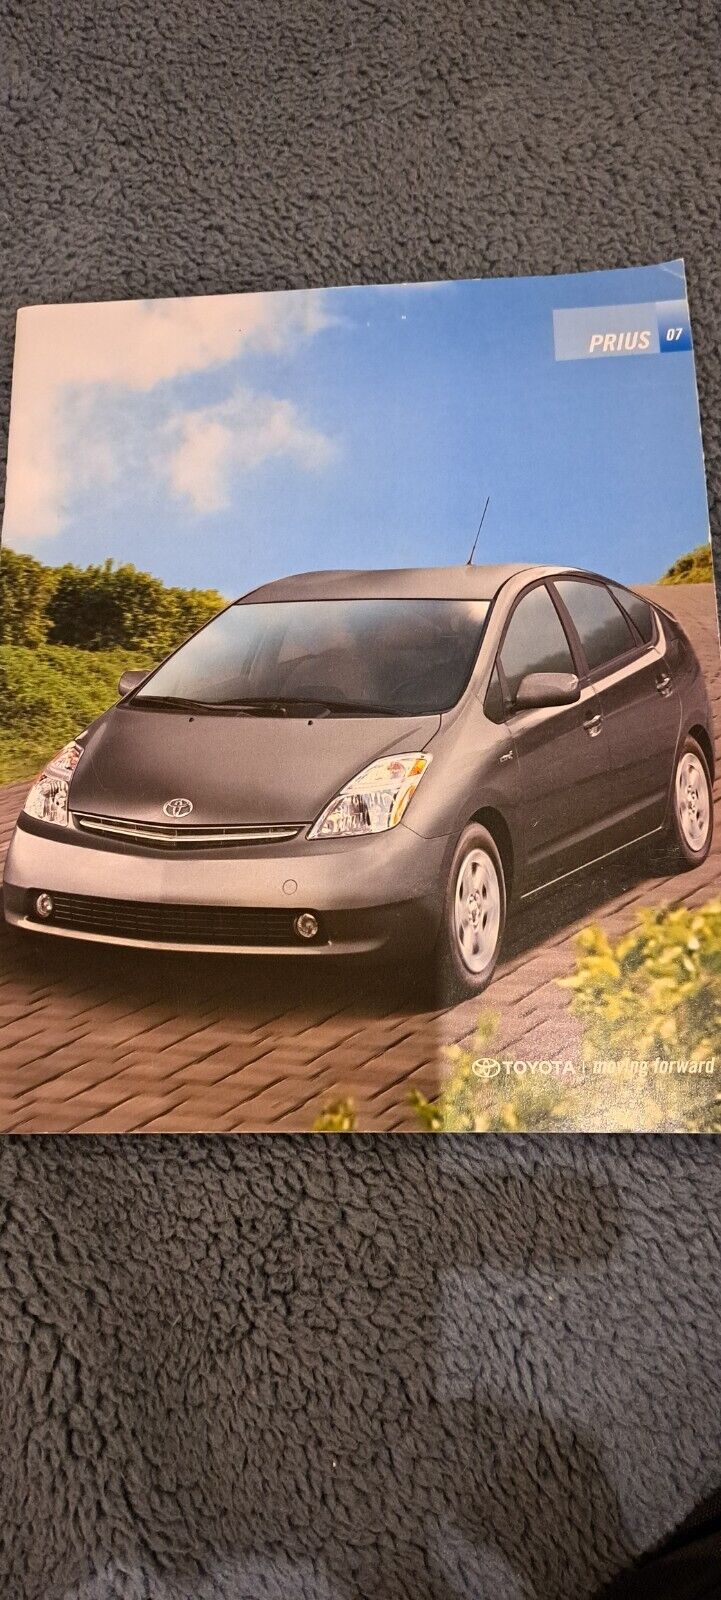 2007 Toyota Prius Brochure Fast Shipping